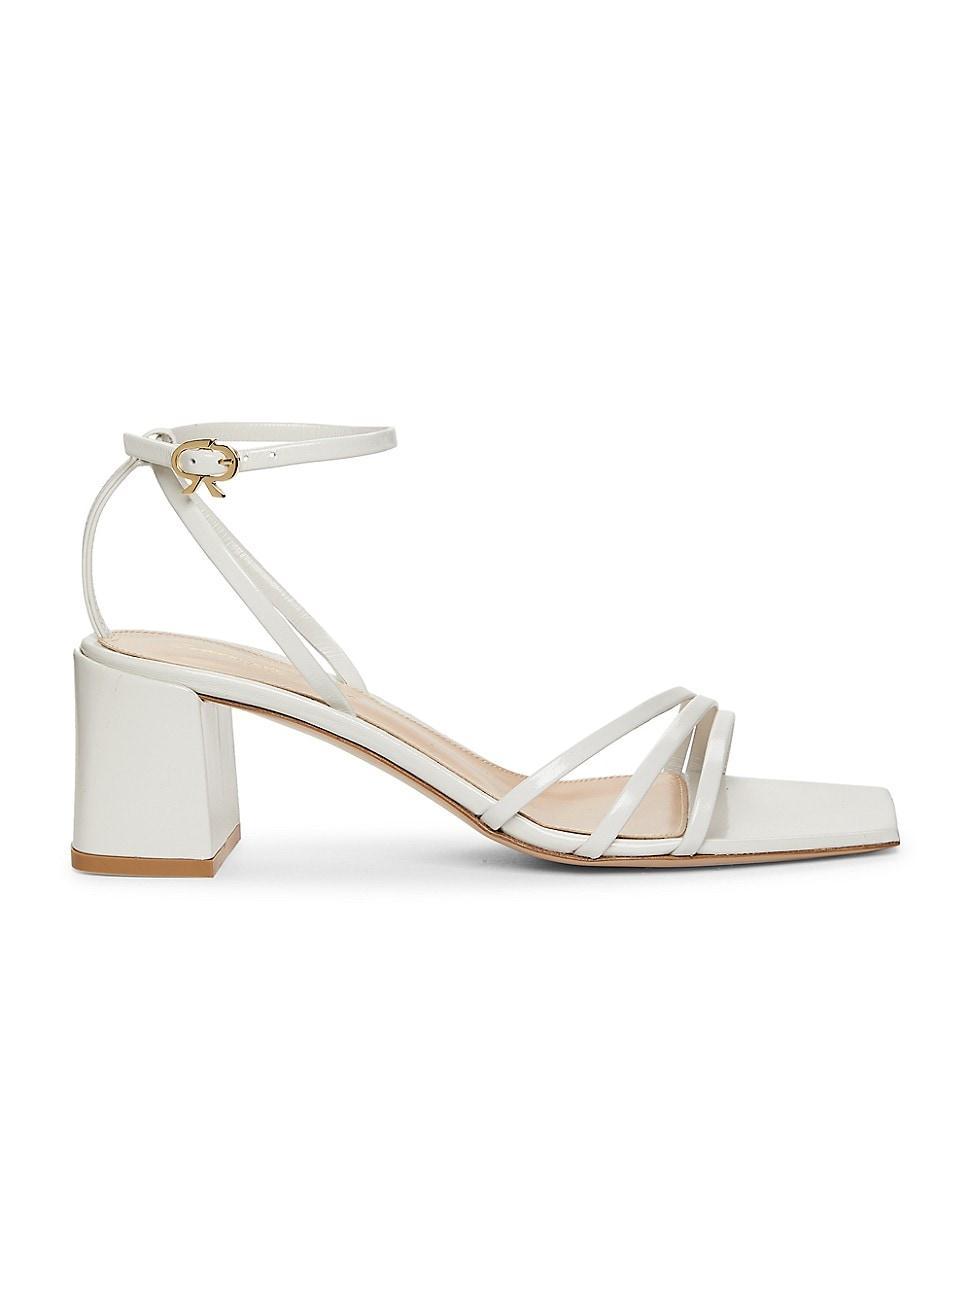 Leather Ankle-Strap Sandals Product Image